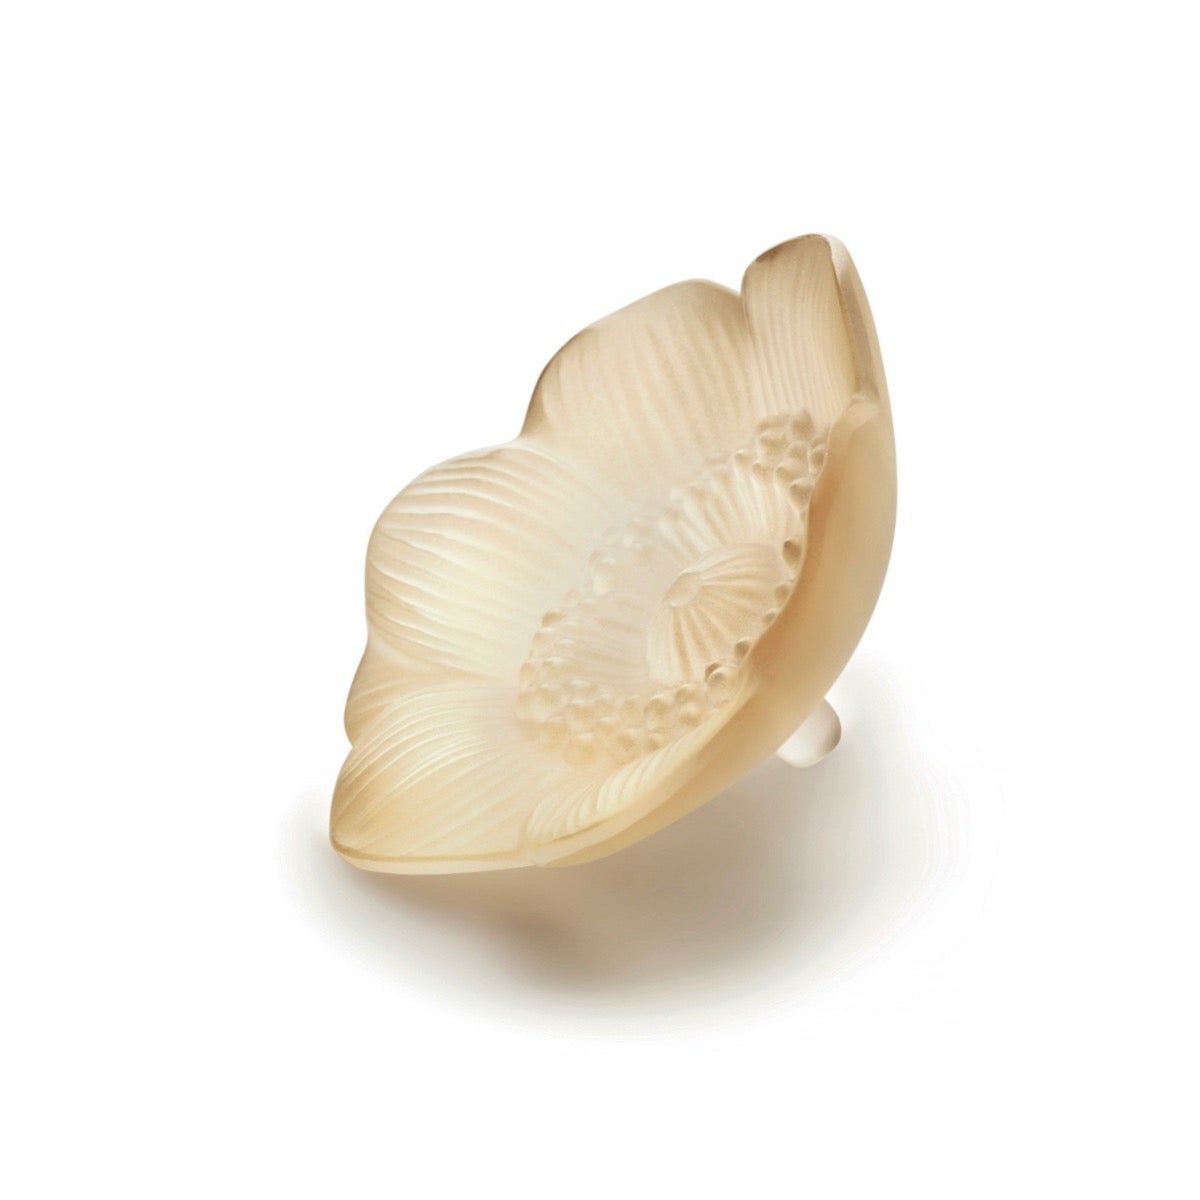 Lalique Anemone Flower Sculpture, Small Gold Luster